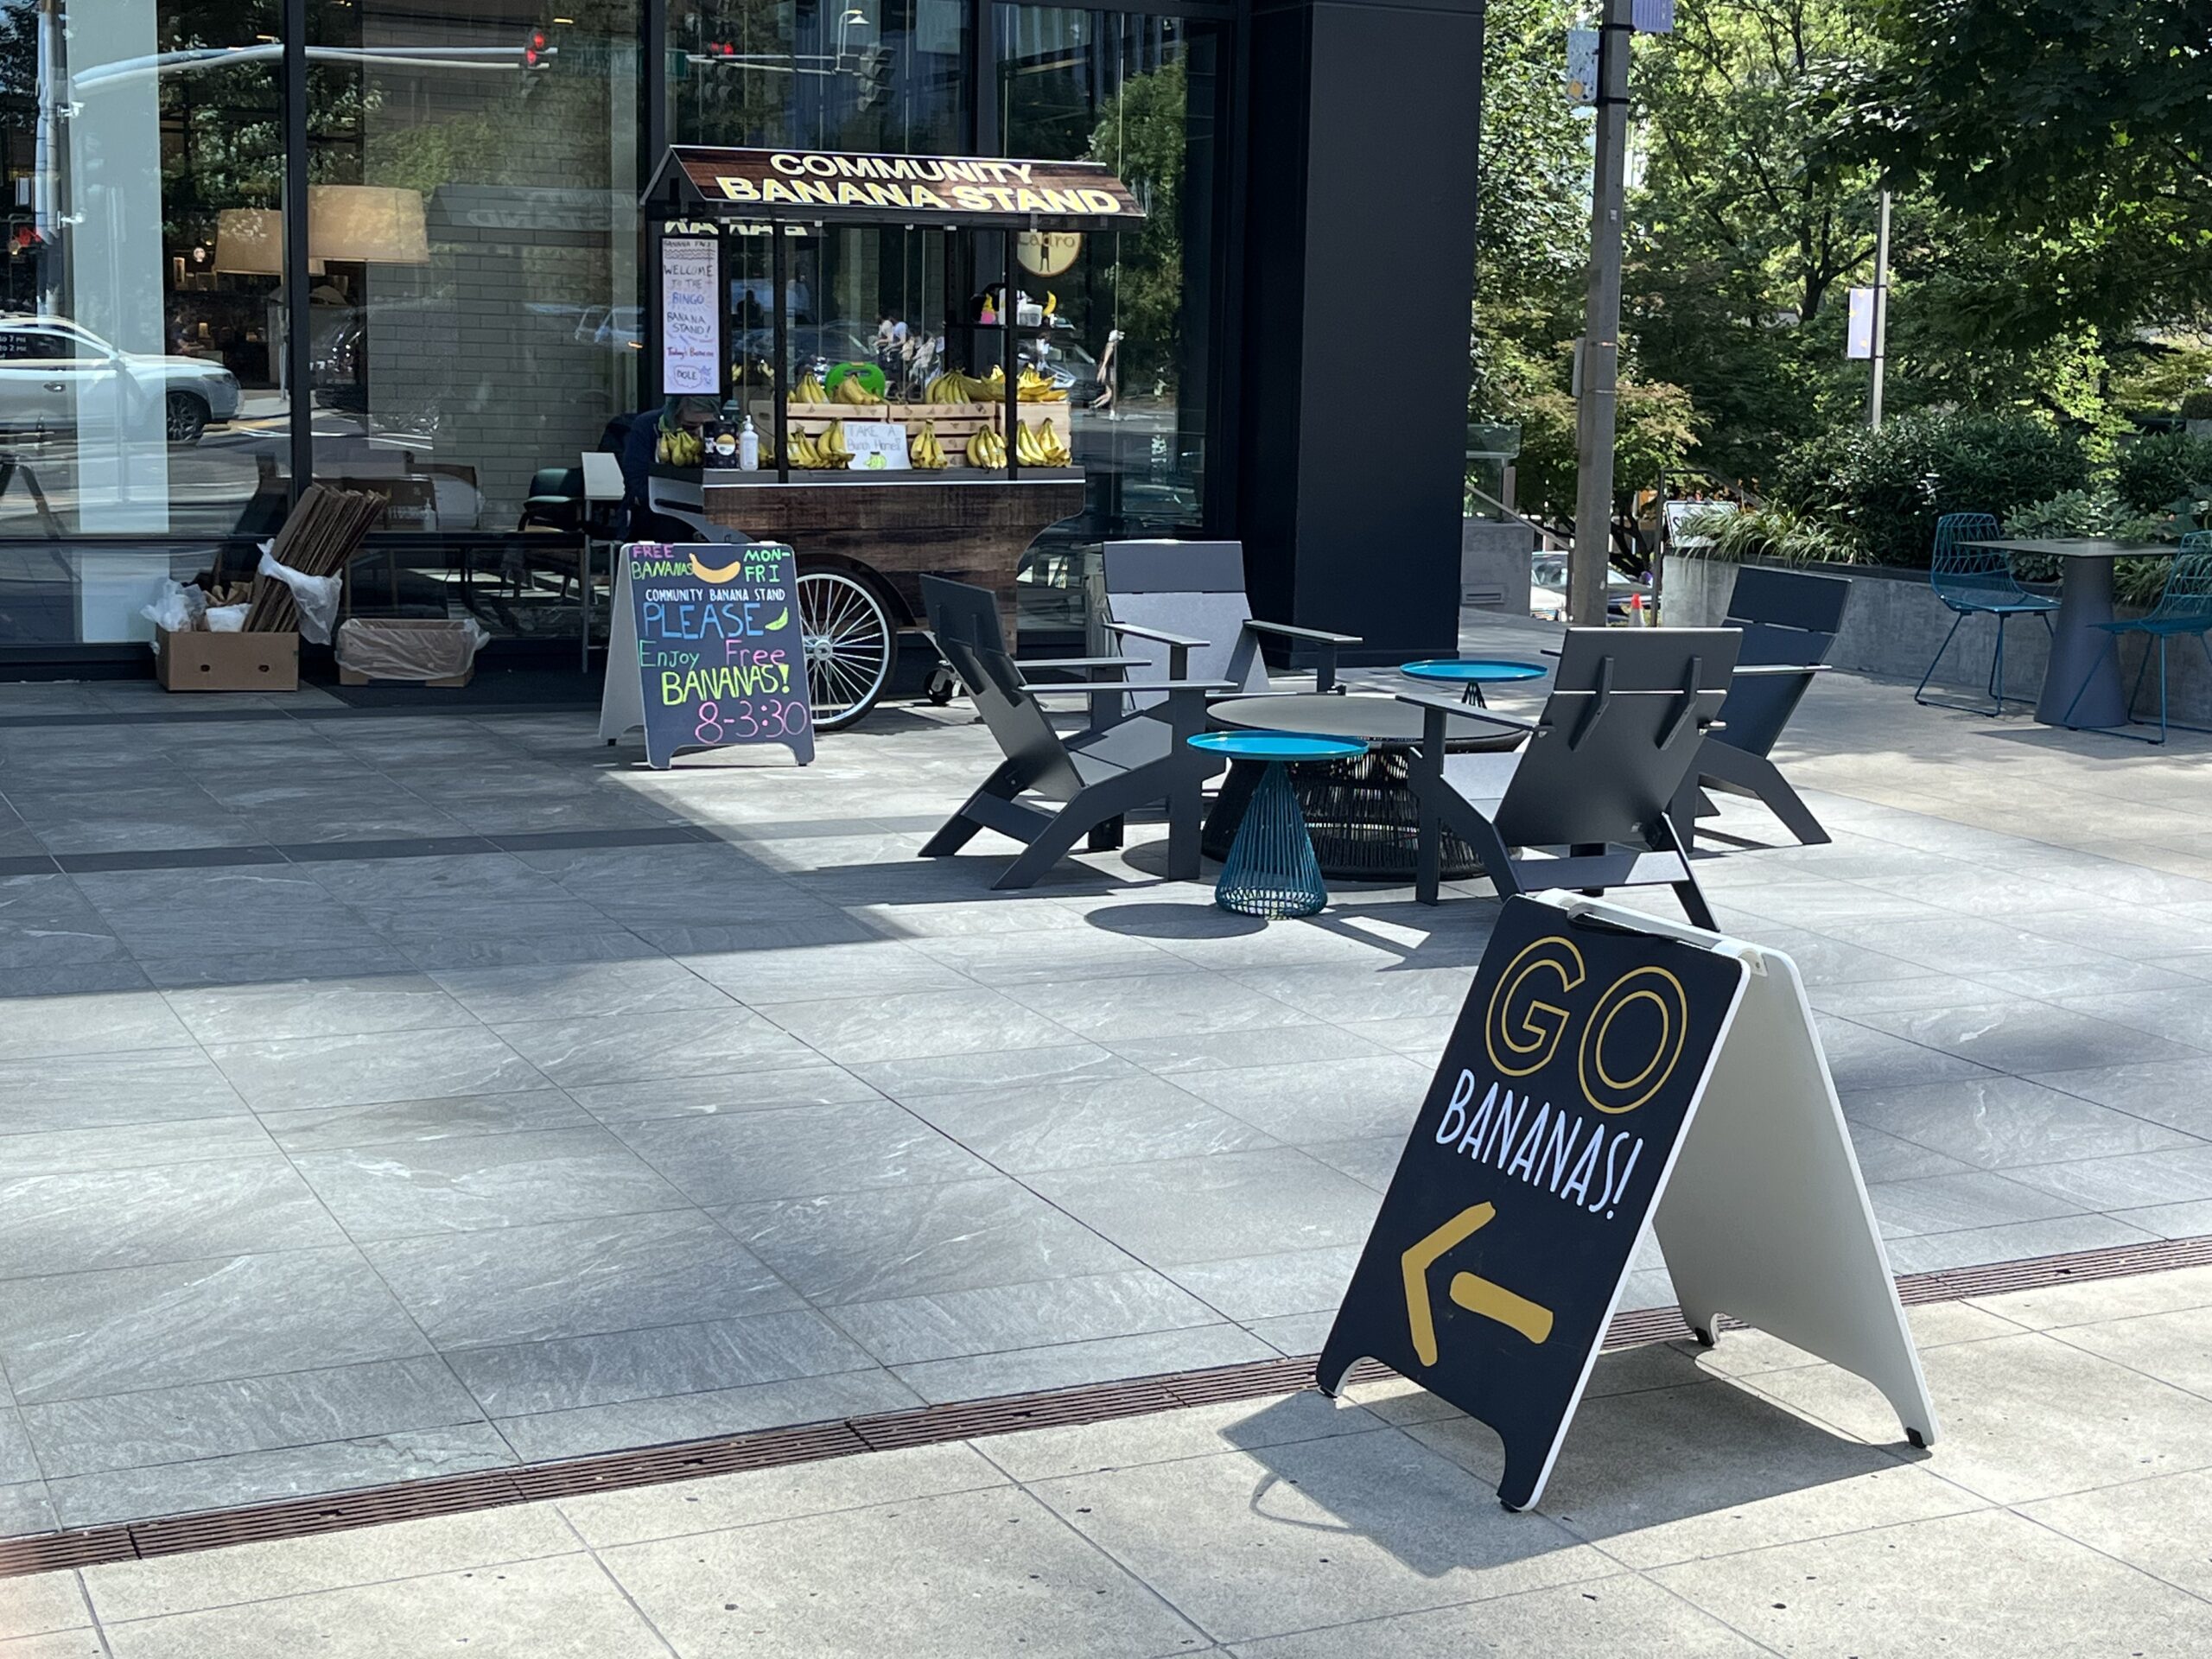 Amazon's Banana Stand in Downtown Bellevue